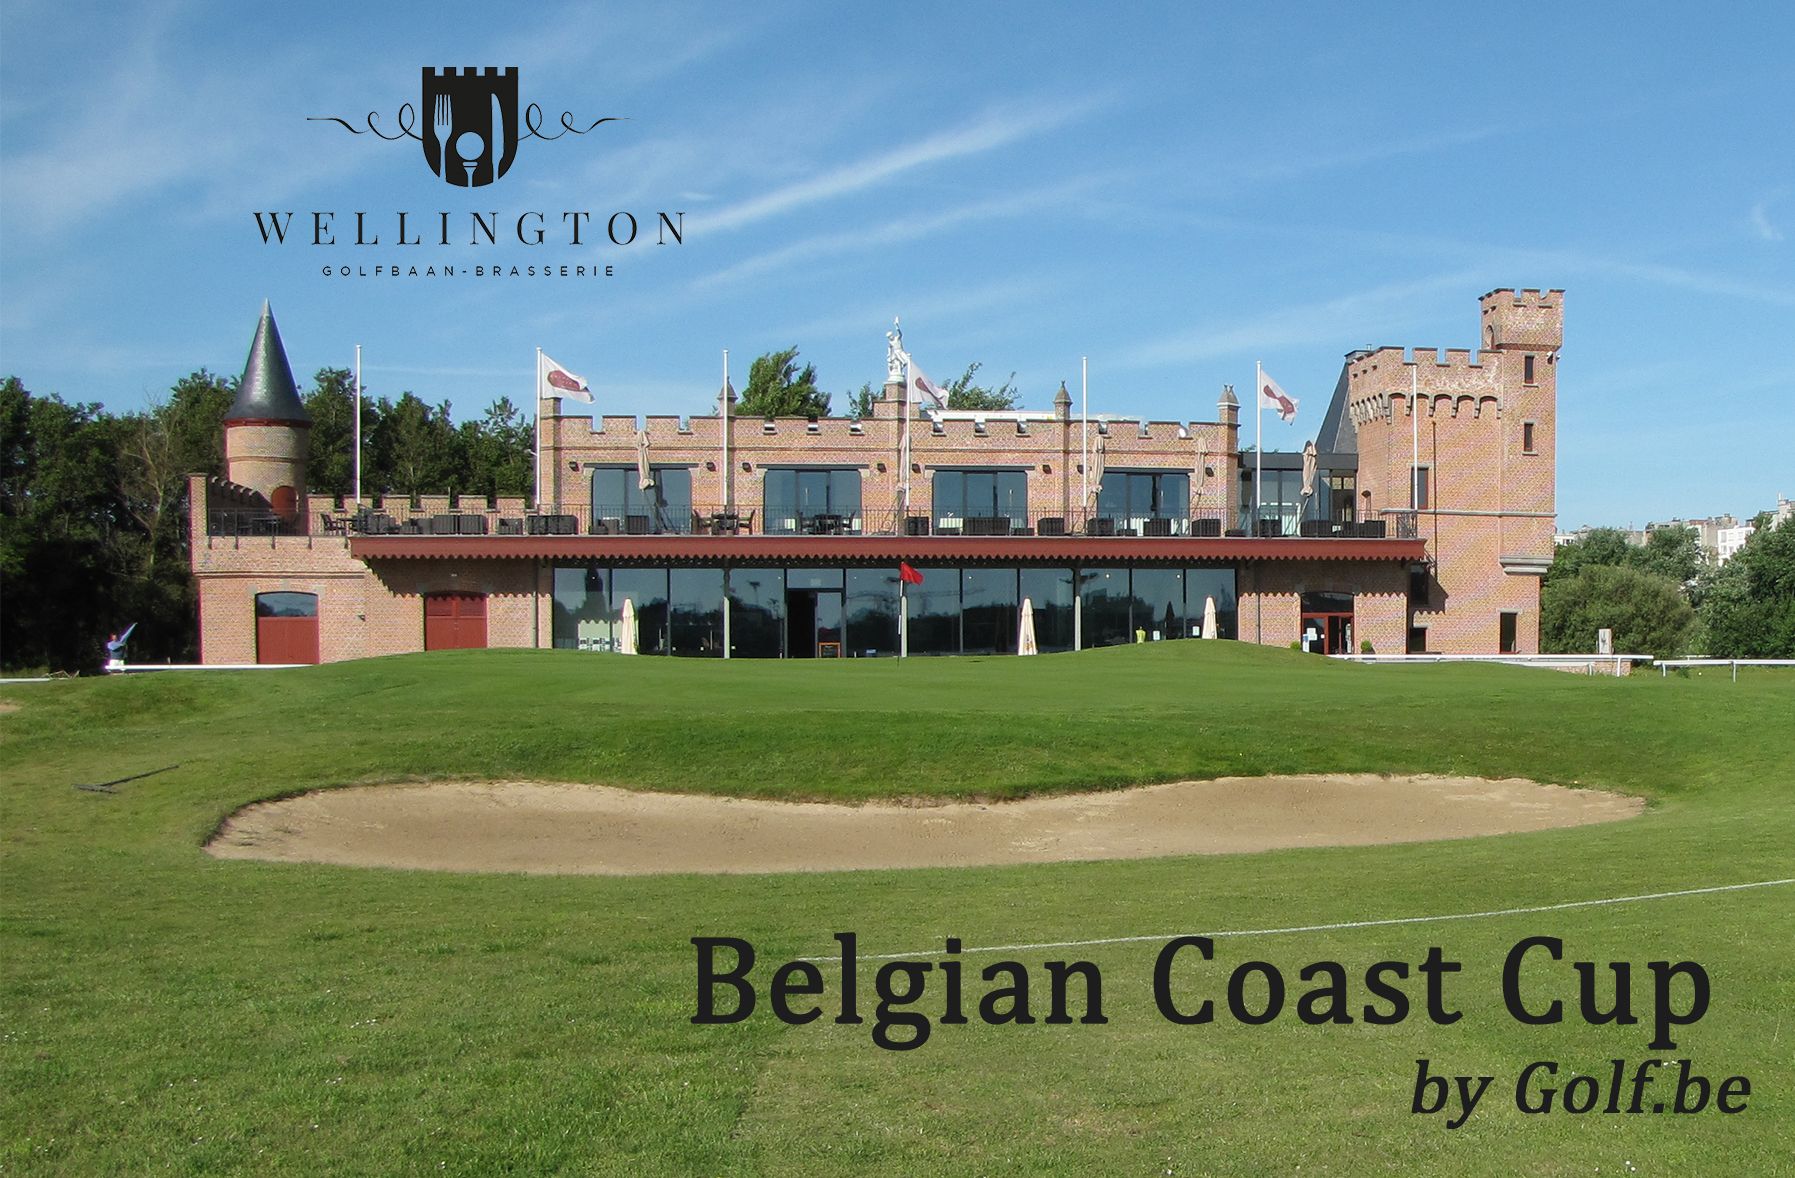 Belgian Coast Cup by Golf.be